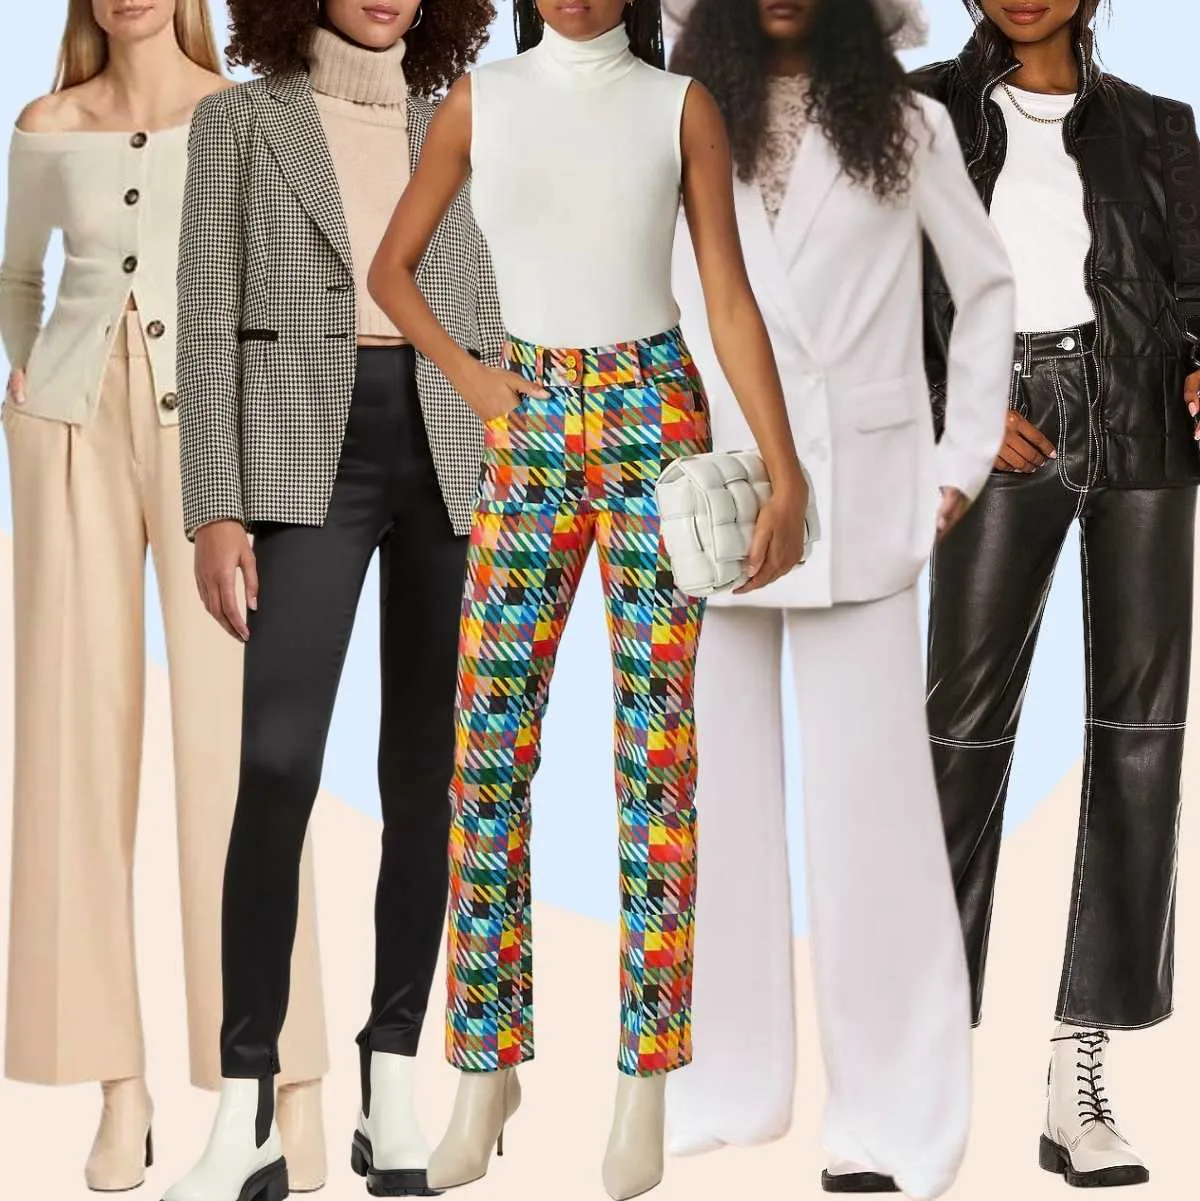 Collage of 5 women wearing different white boots outfits with dress pants.